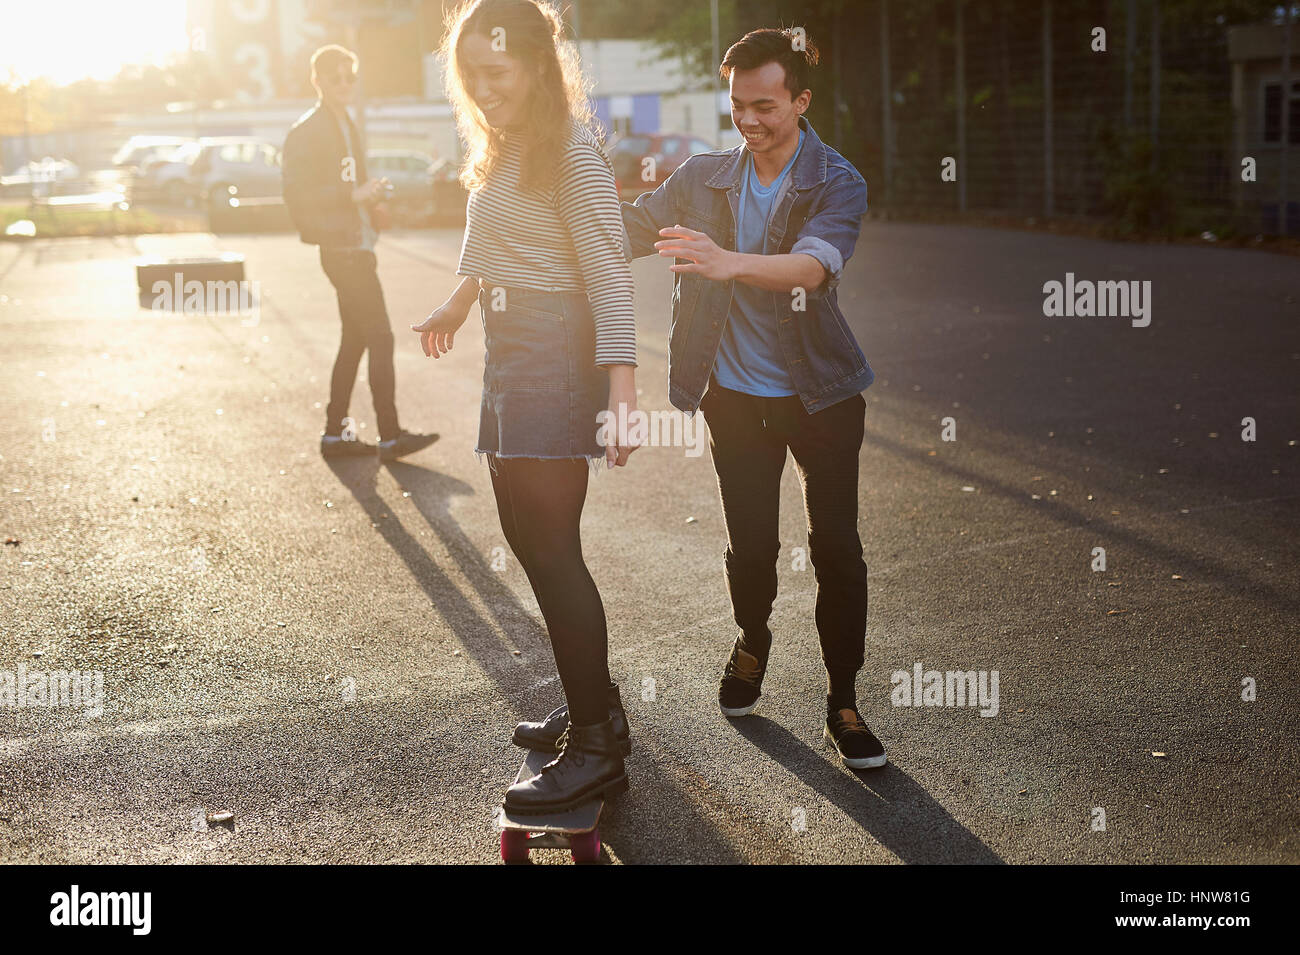 Young man pushing young female skateboarder on sunlit street Stock Photo